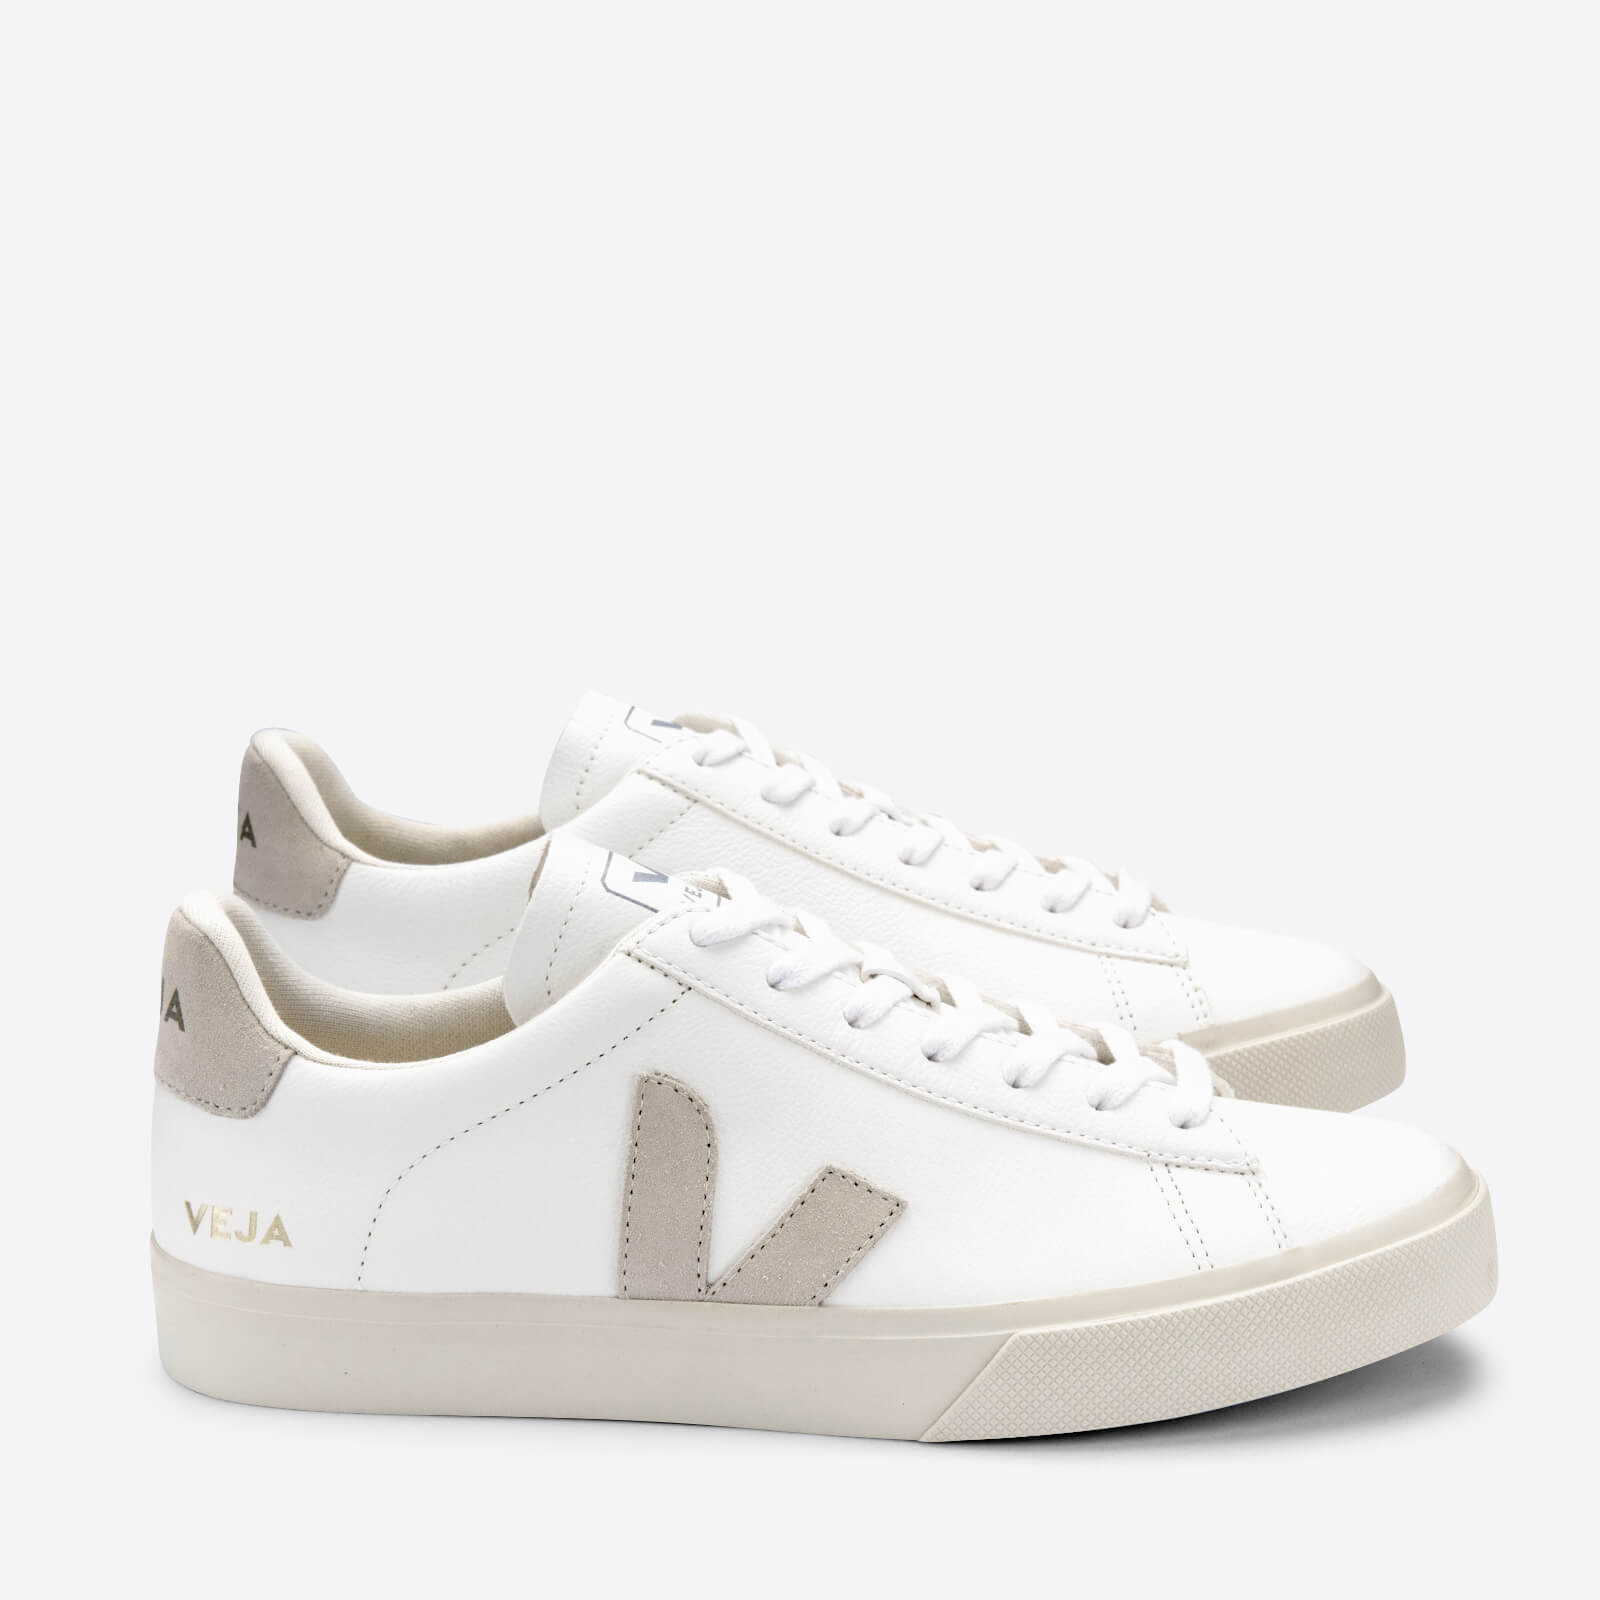 Veja Women's Campo Chrome Free Trainers - Extra White/Natural/Butter Sole - UK 2